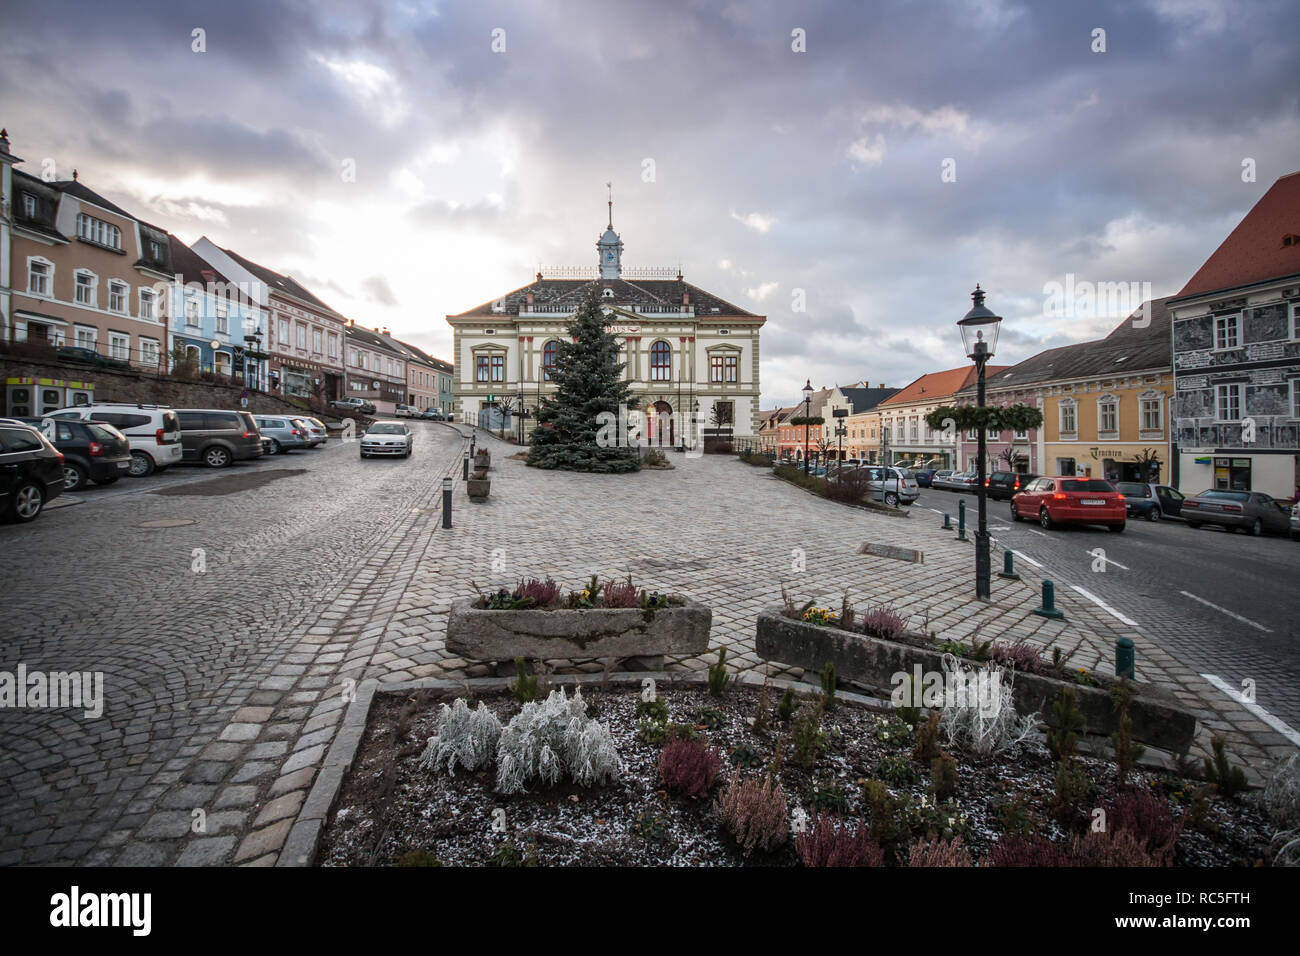 City hall of Weitra on a cloudy winter day, Waldviertel, Austria Stock Photo